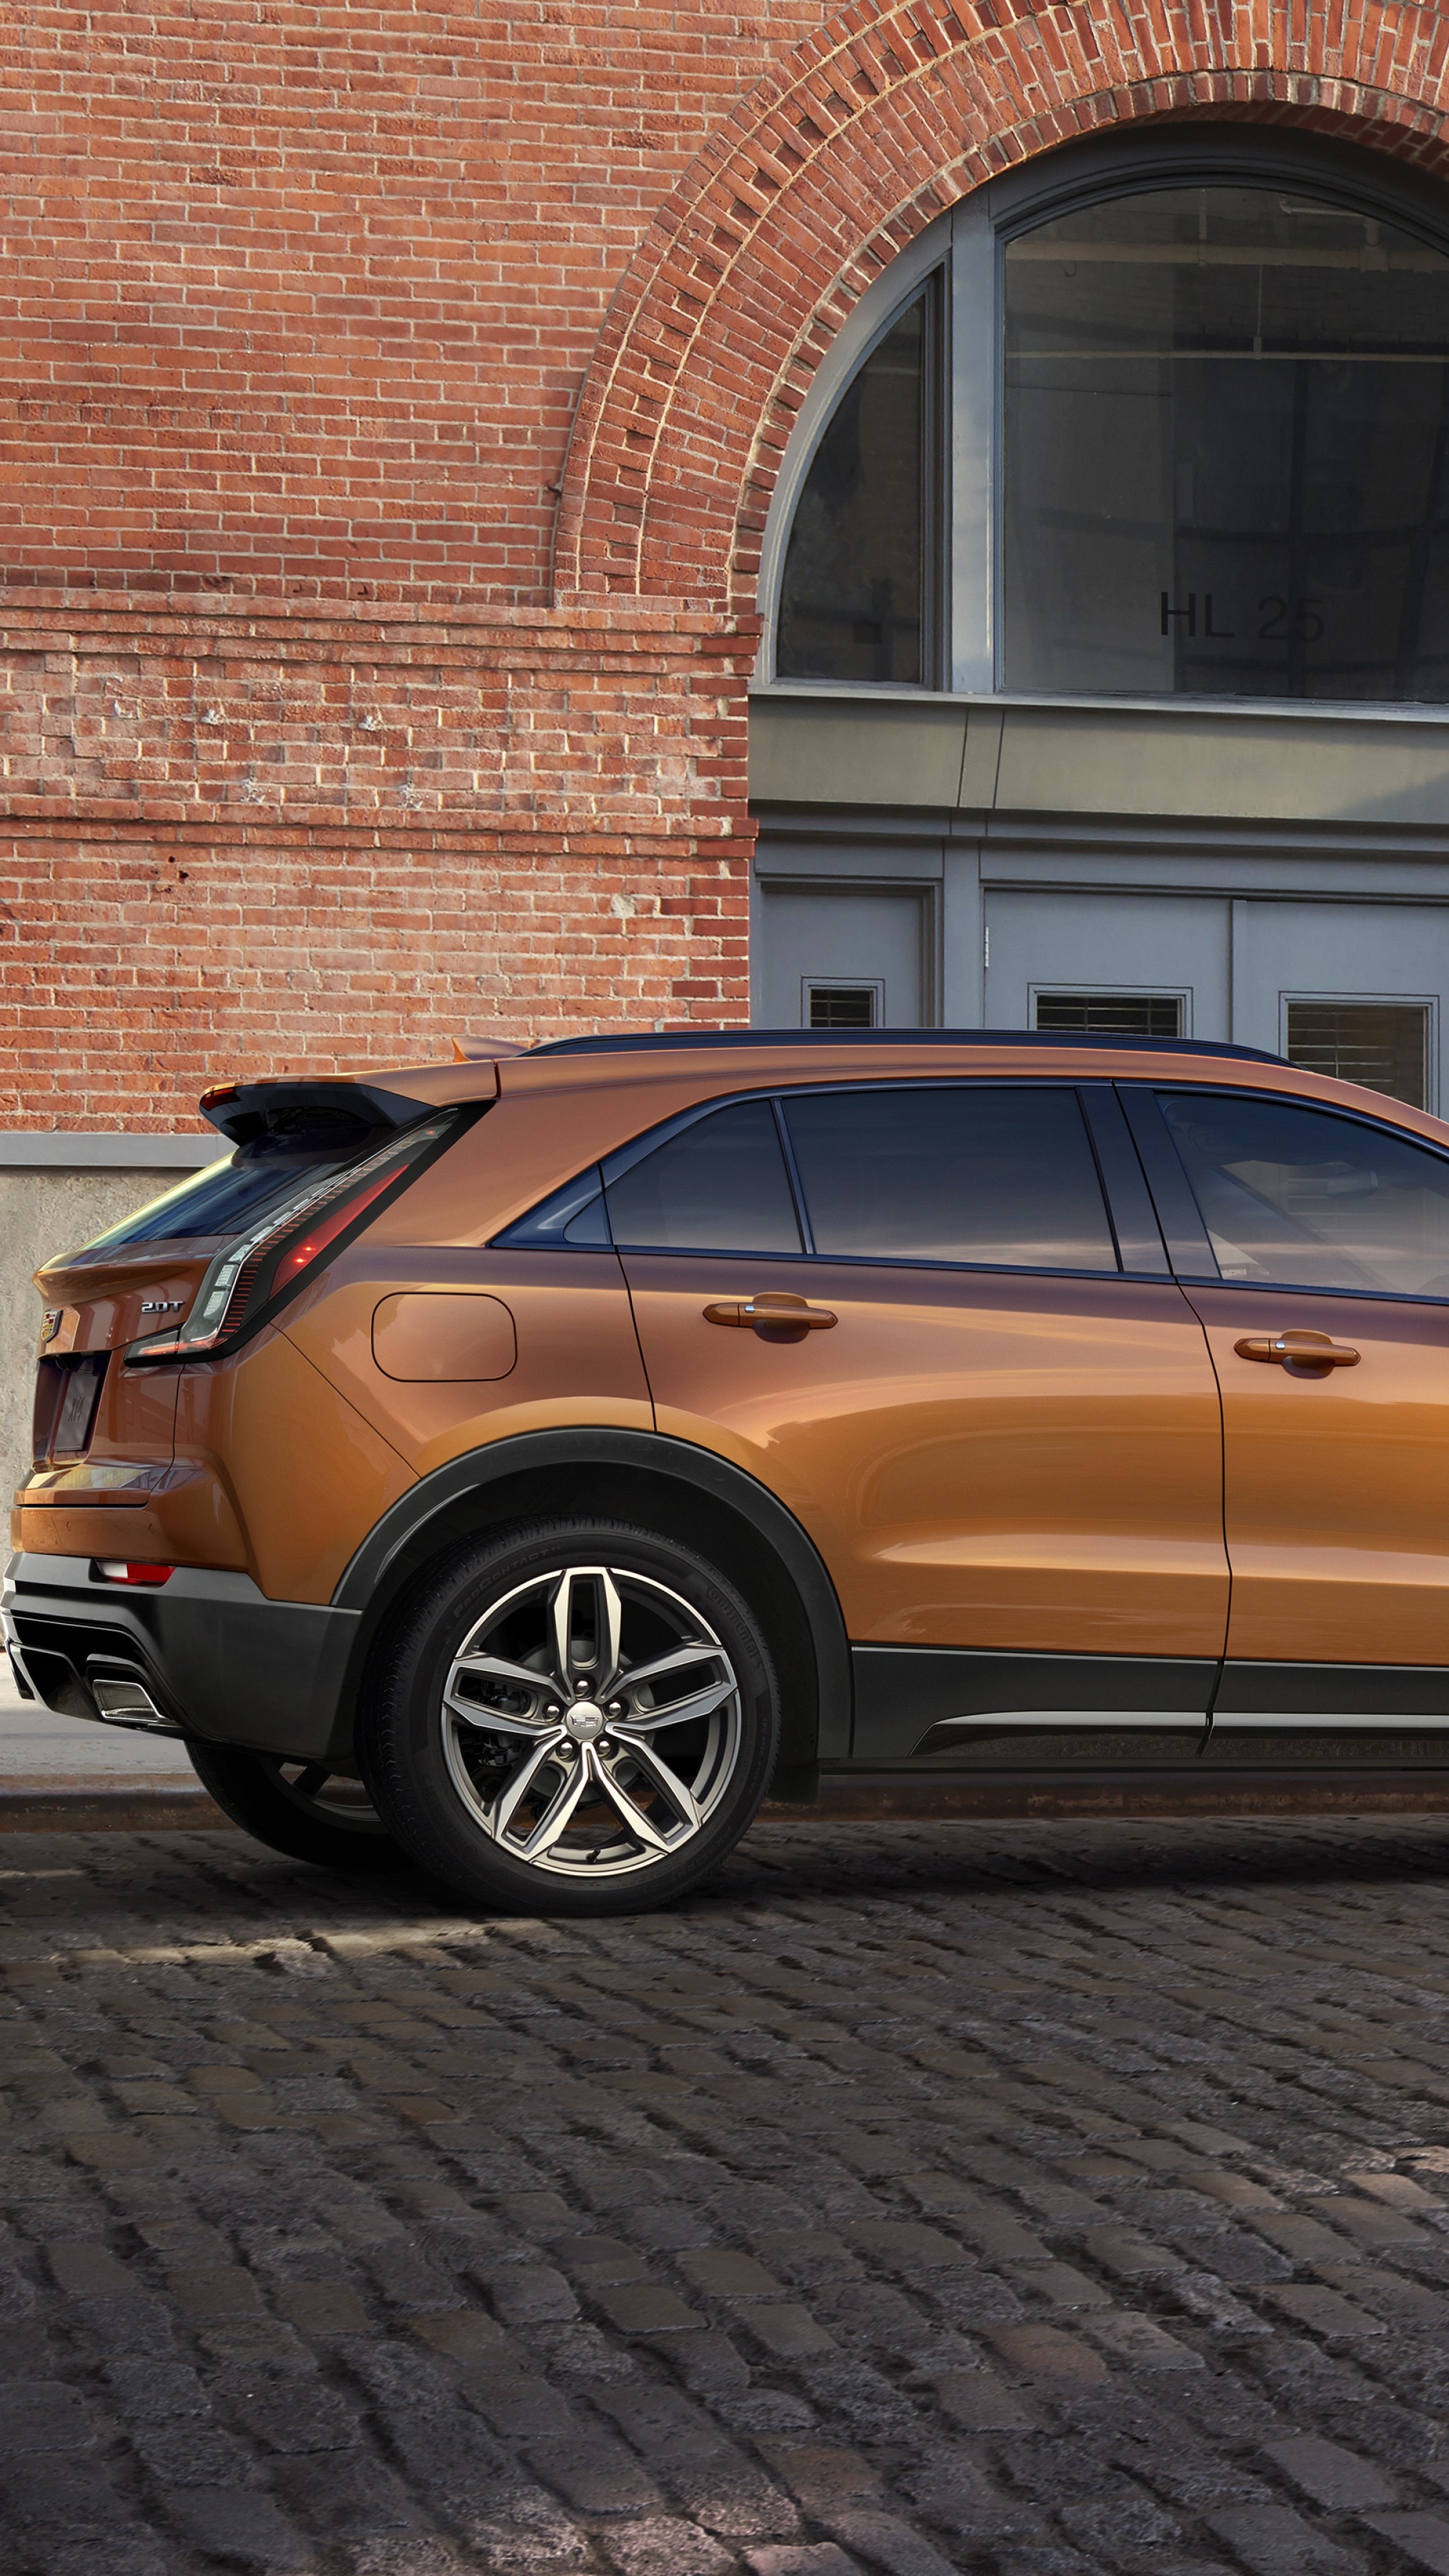 Cadillac XT4, SUV beauty, High-resolution wallpapers, Car enthusiast's delight, 2160x3840 4K Phone